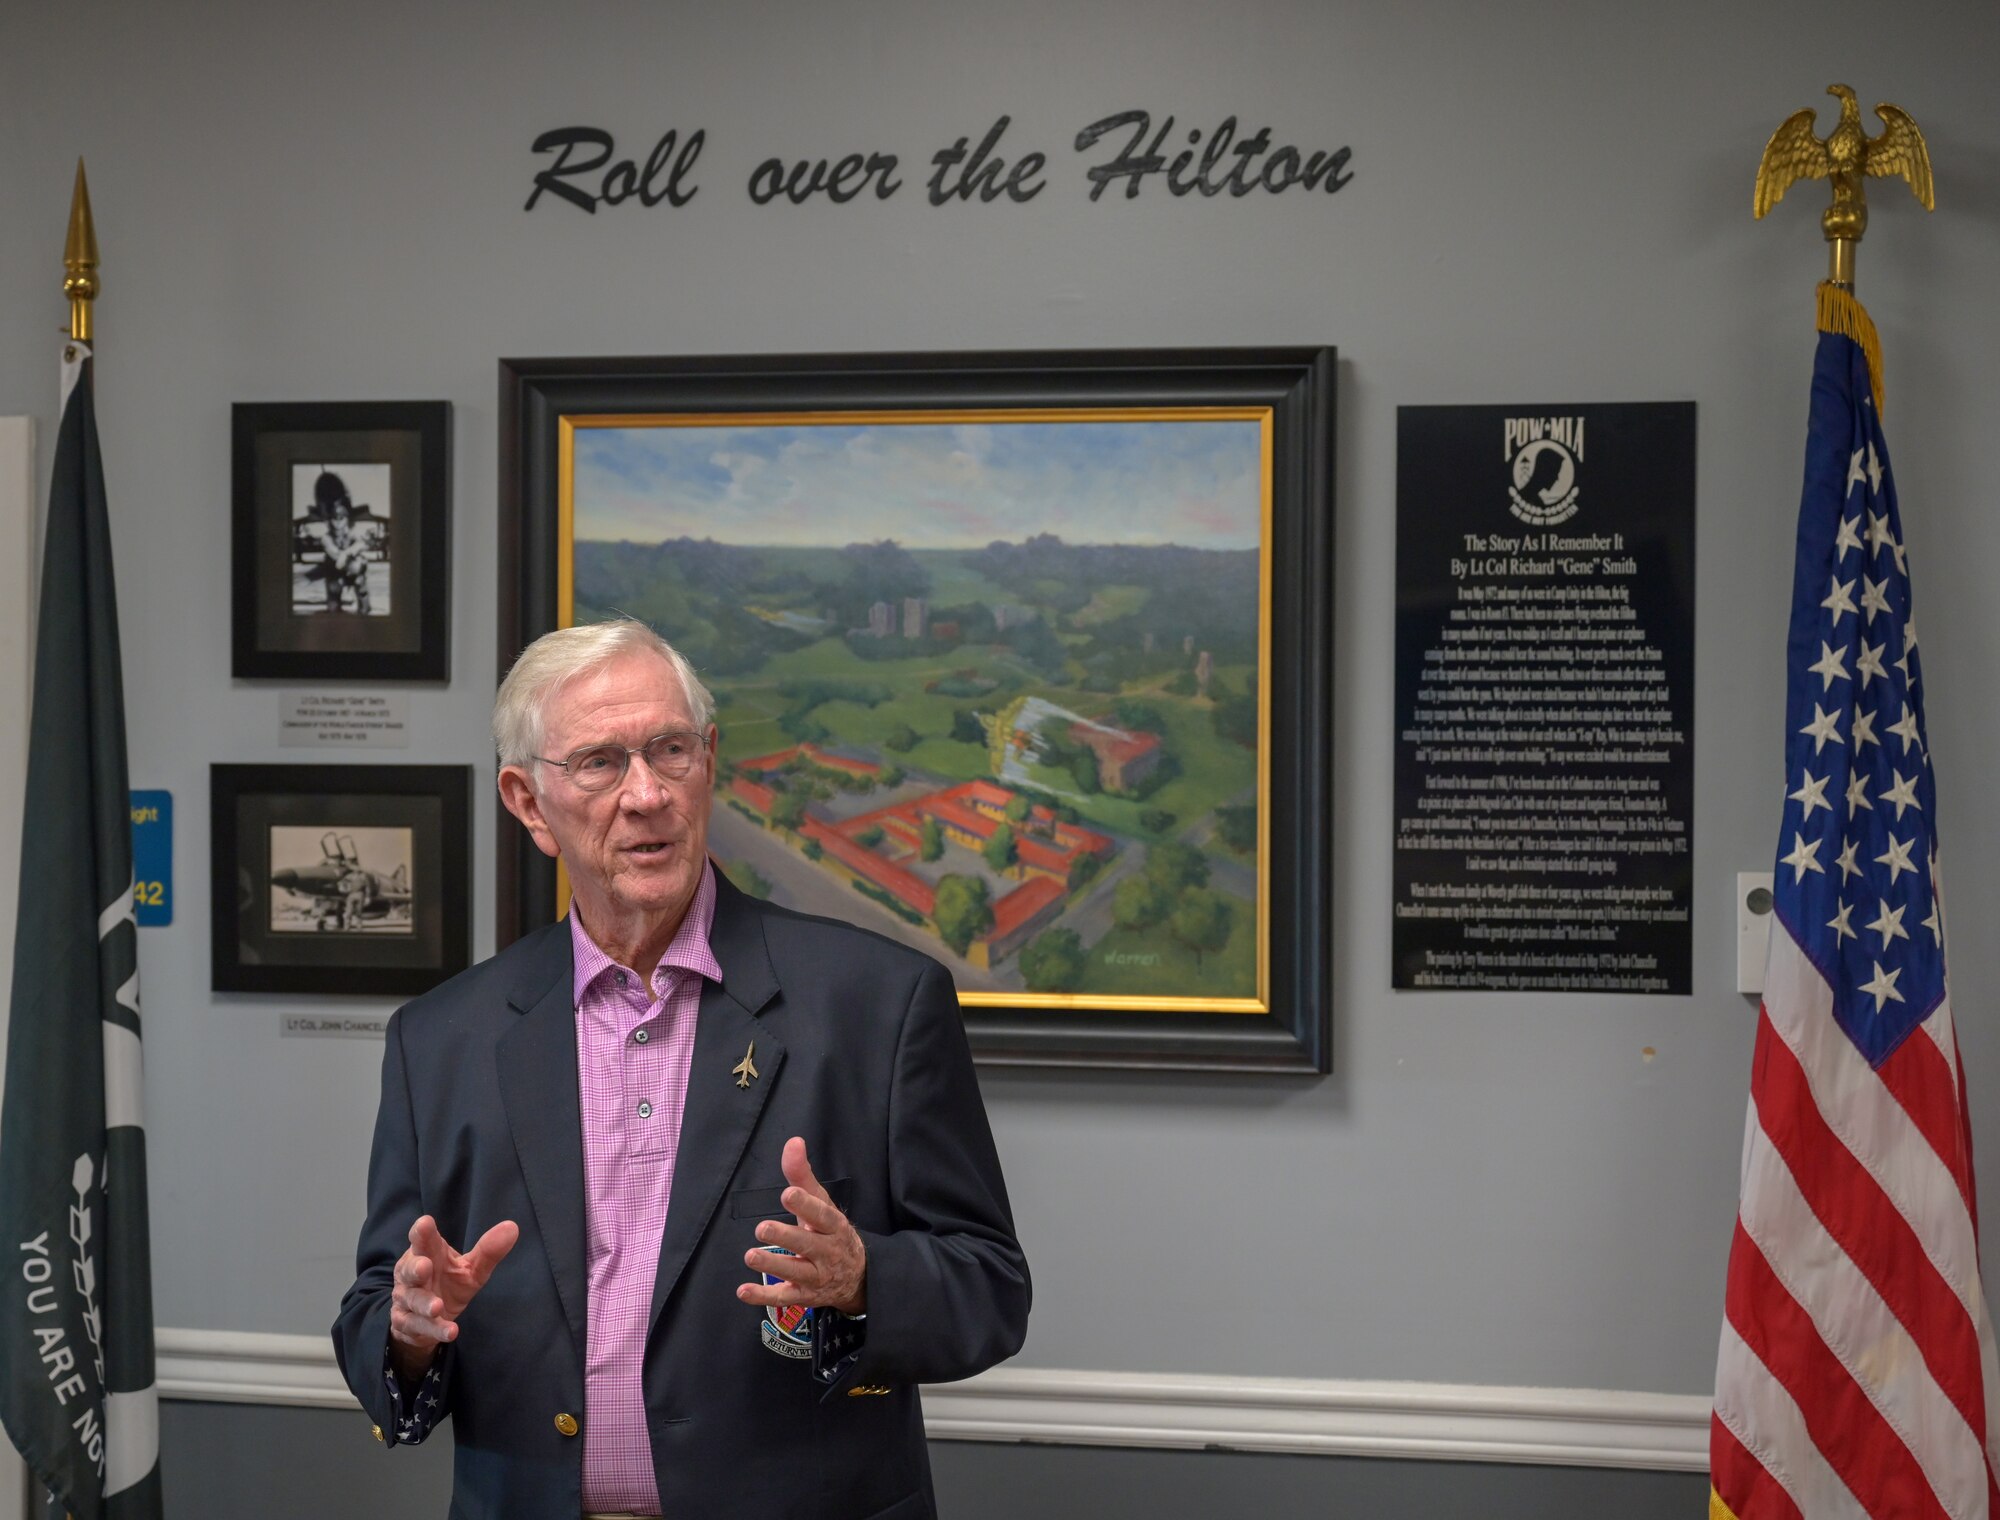 Retired U.S. Air Force Lt. Col. Richard “Gene” Smith, Vietnam prisoner of war and former 50th Flying Training Wing commander, tells a story about his time as a POW on Nov. 13, 2020, at Columbus Air Force Base, Miss. Smith was a POW during the Vietnam War from Oct. 25, 1967 to March 14, 1973. (U.S. Air Force photo by Airman 1st Class Davis Donaldson)